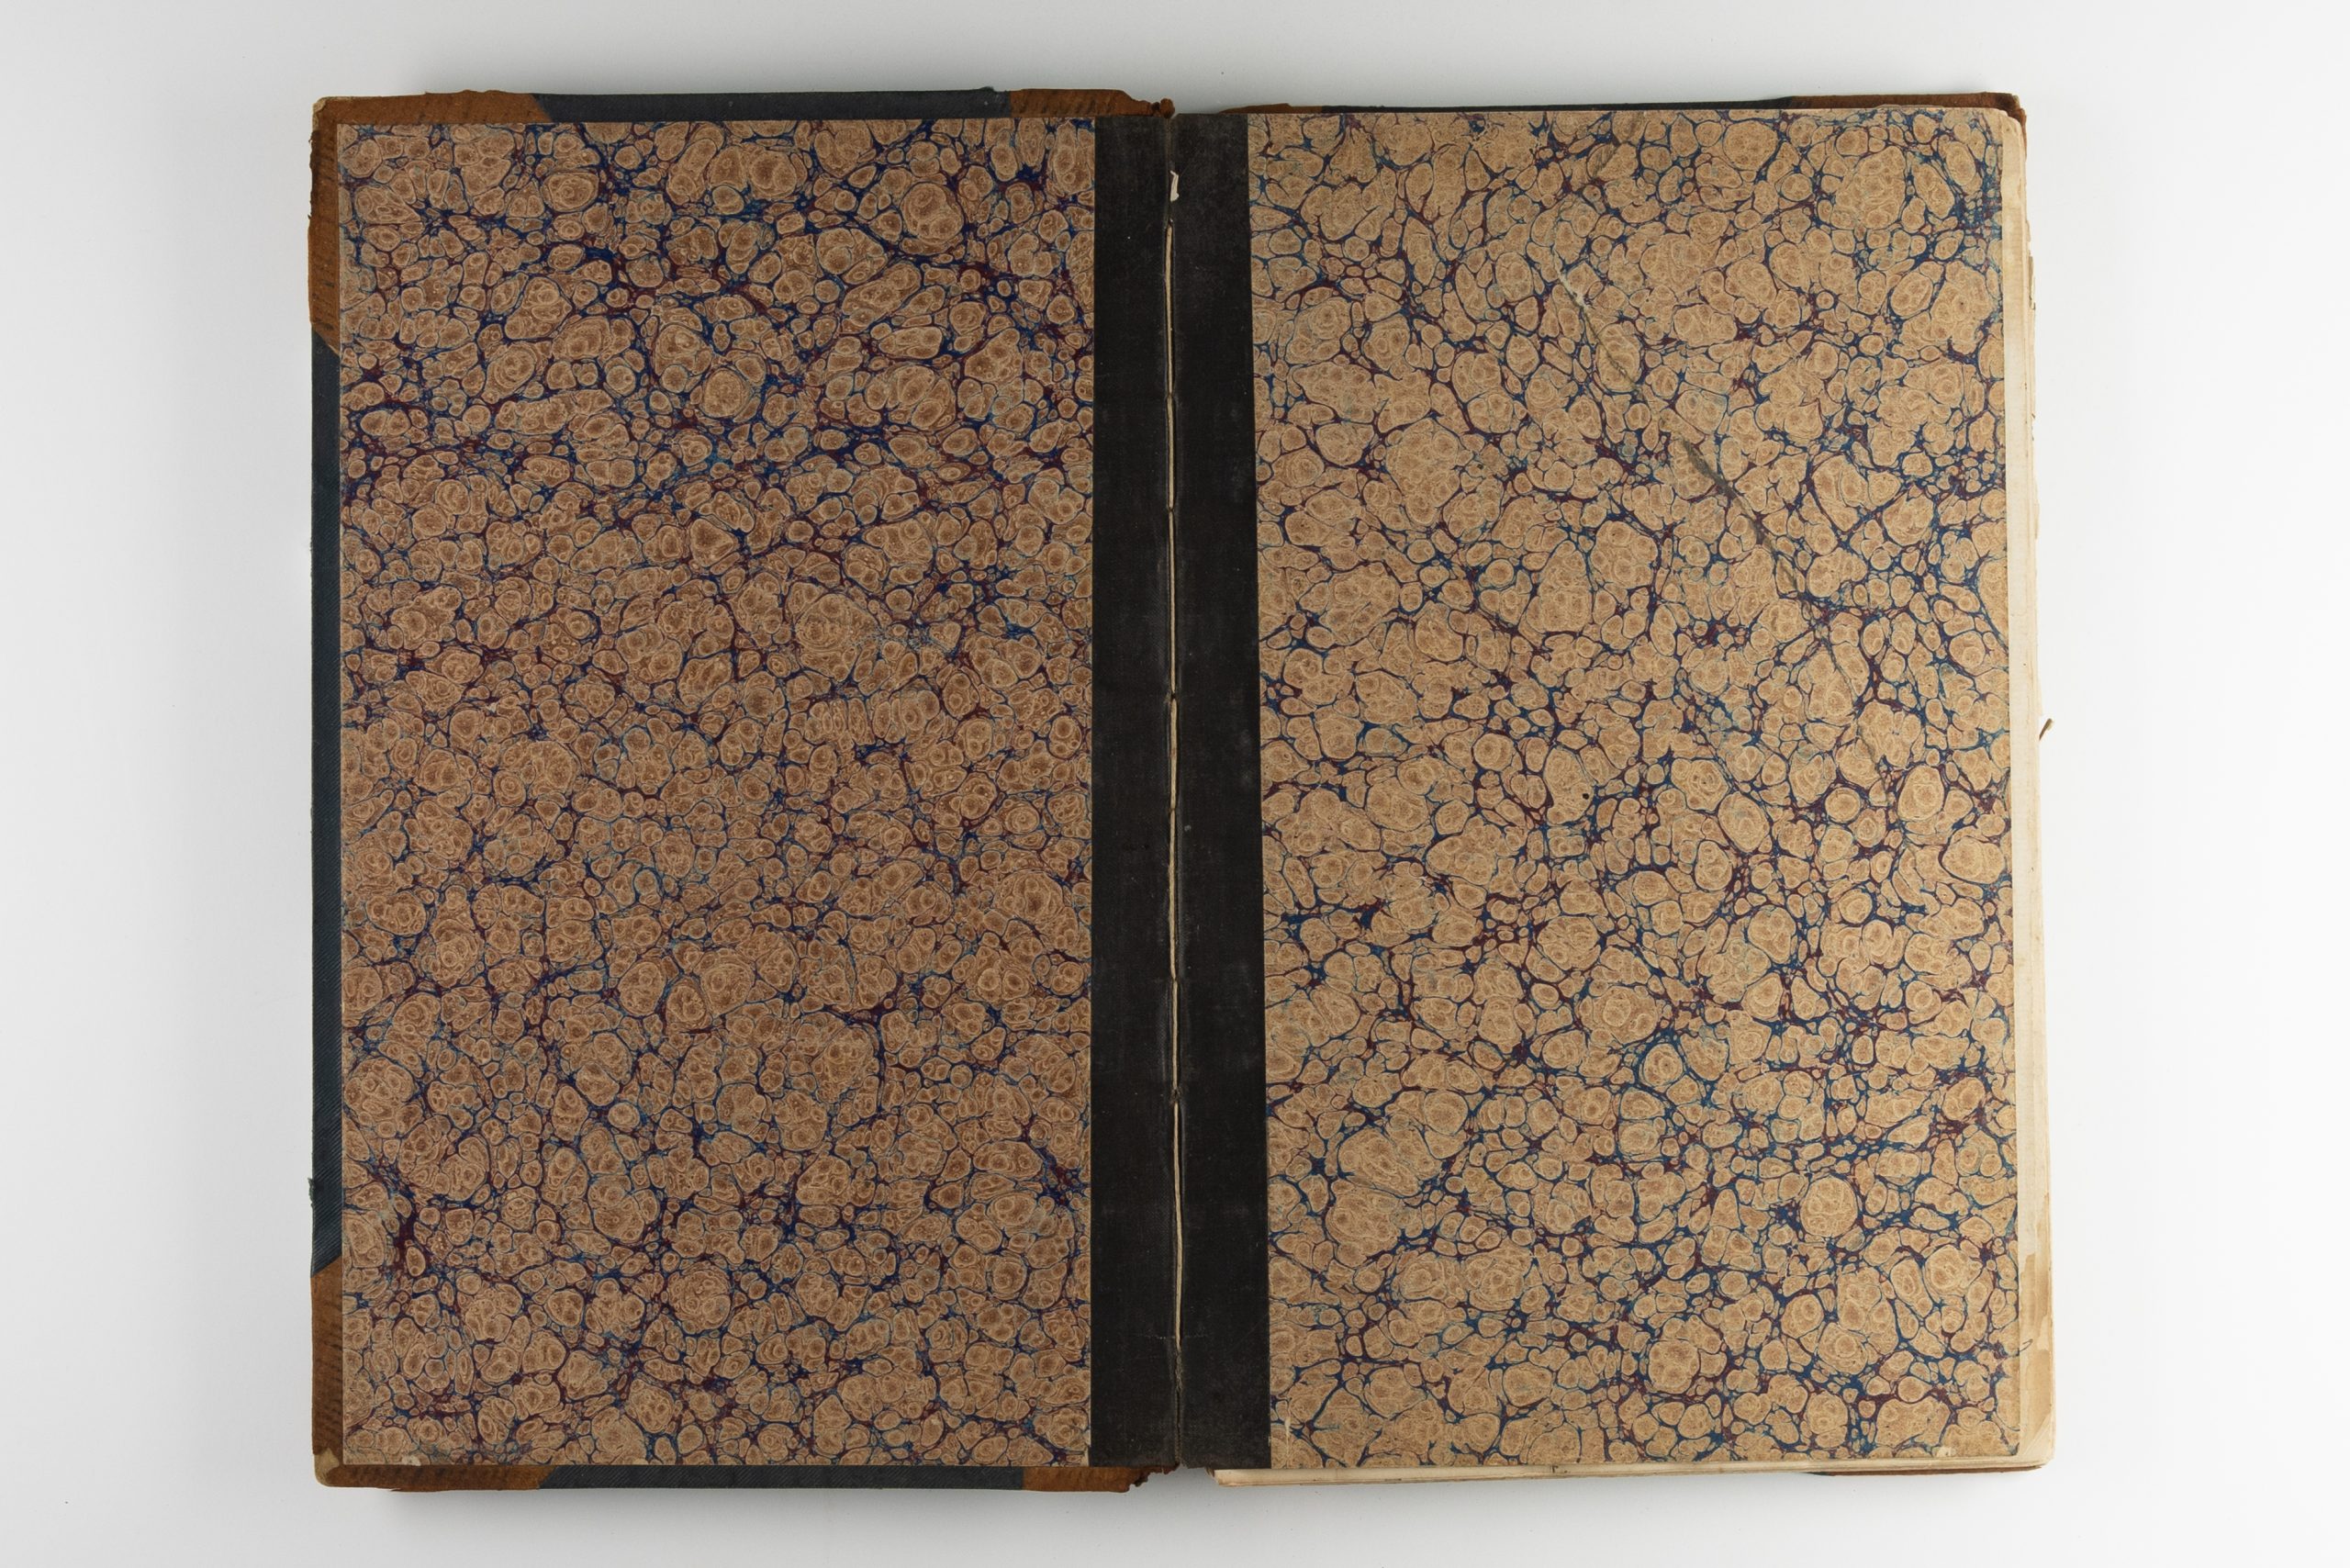 Book open to the binding pages; they are sepia, brown, and black in a marbled pattern